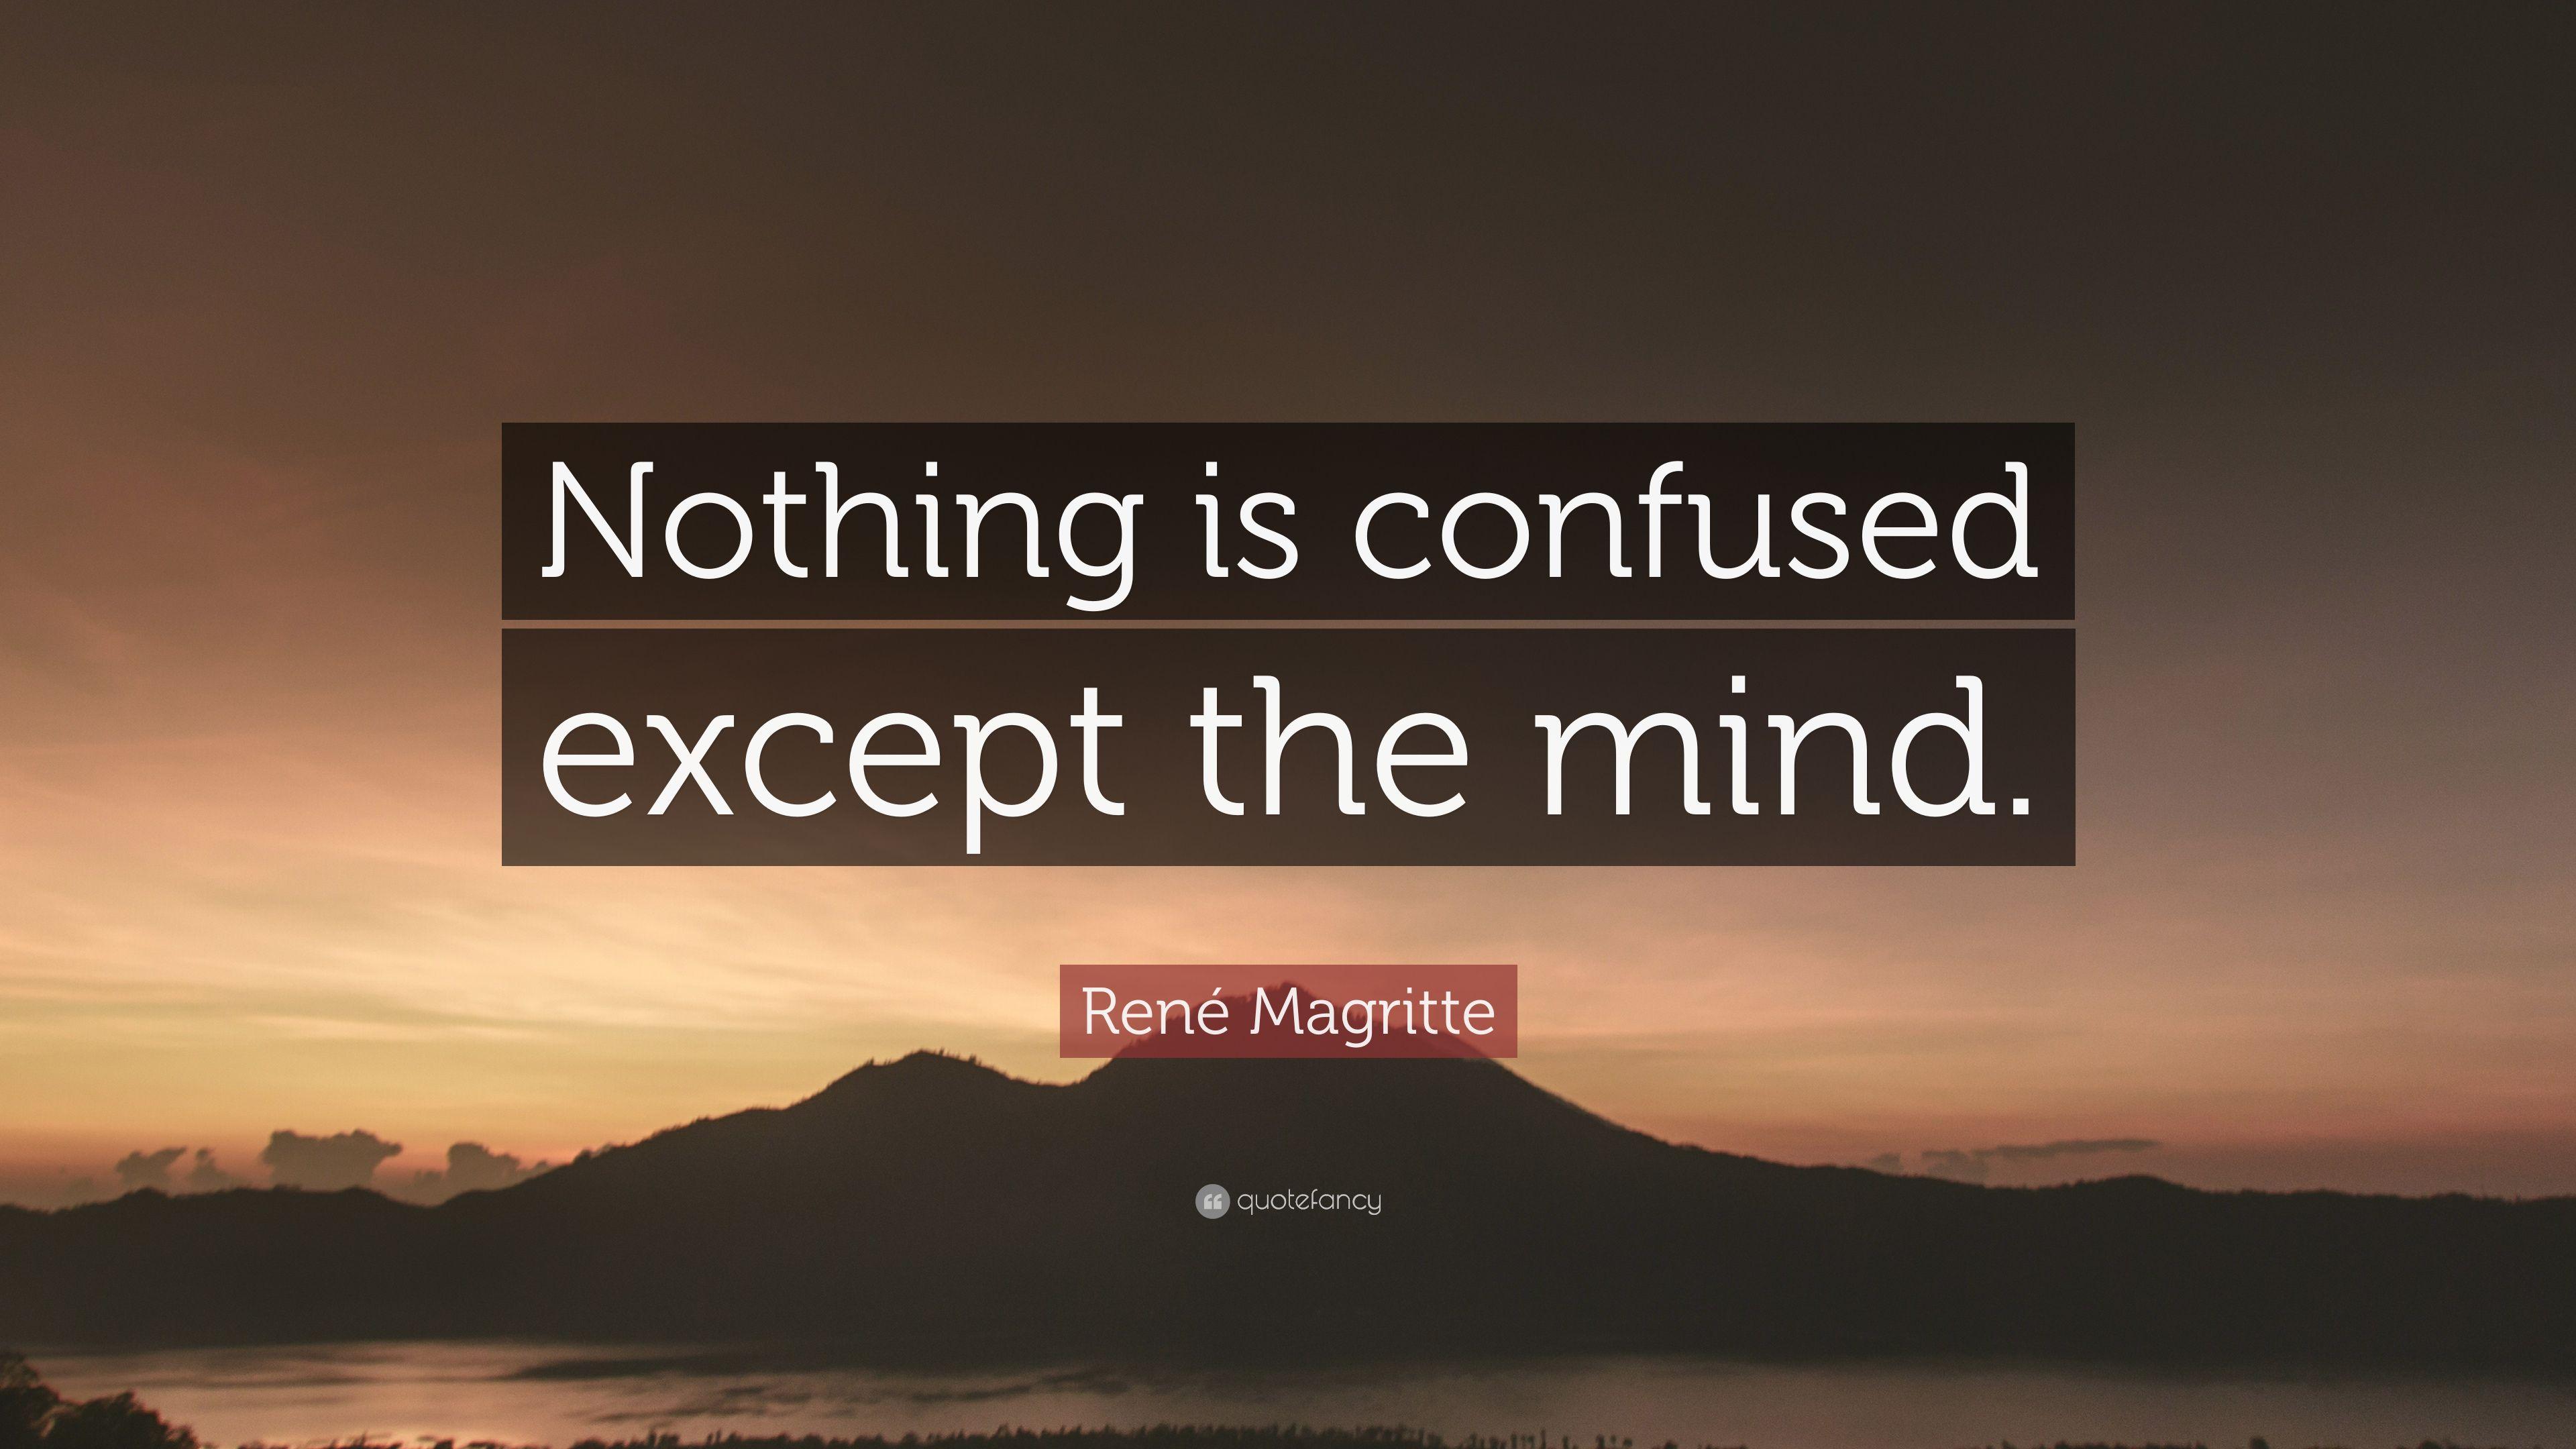 René Magritte Quote: “Nothing is confused except the mind.” 9